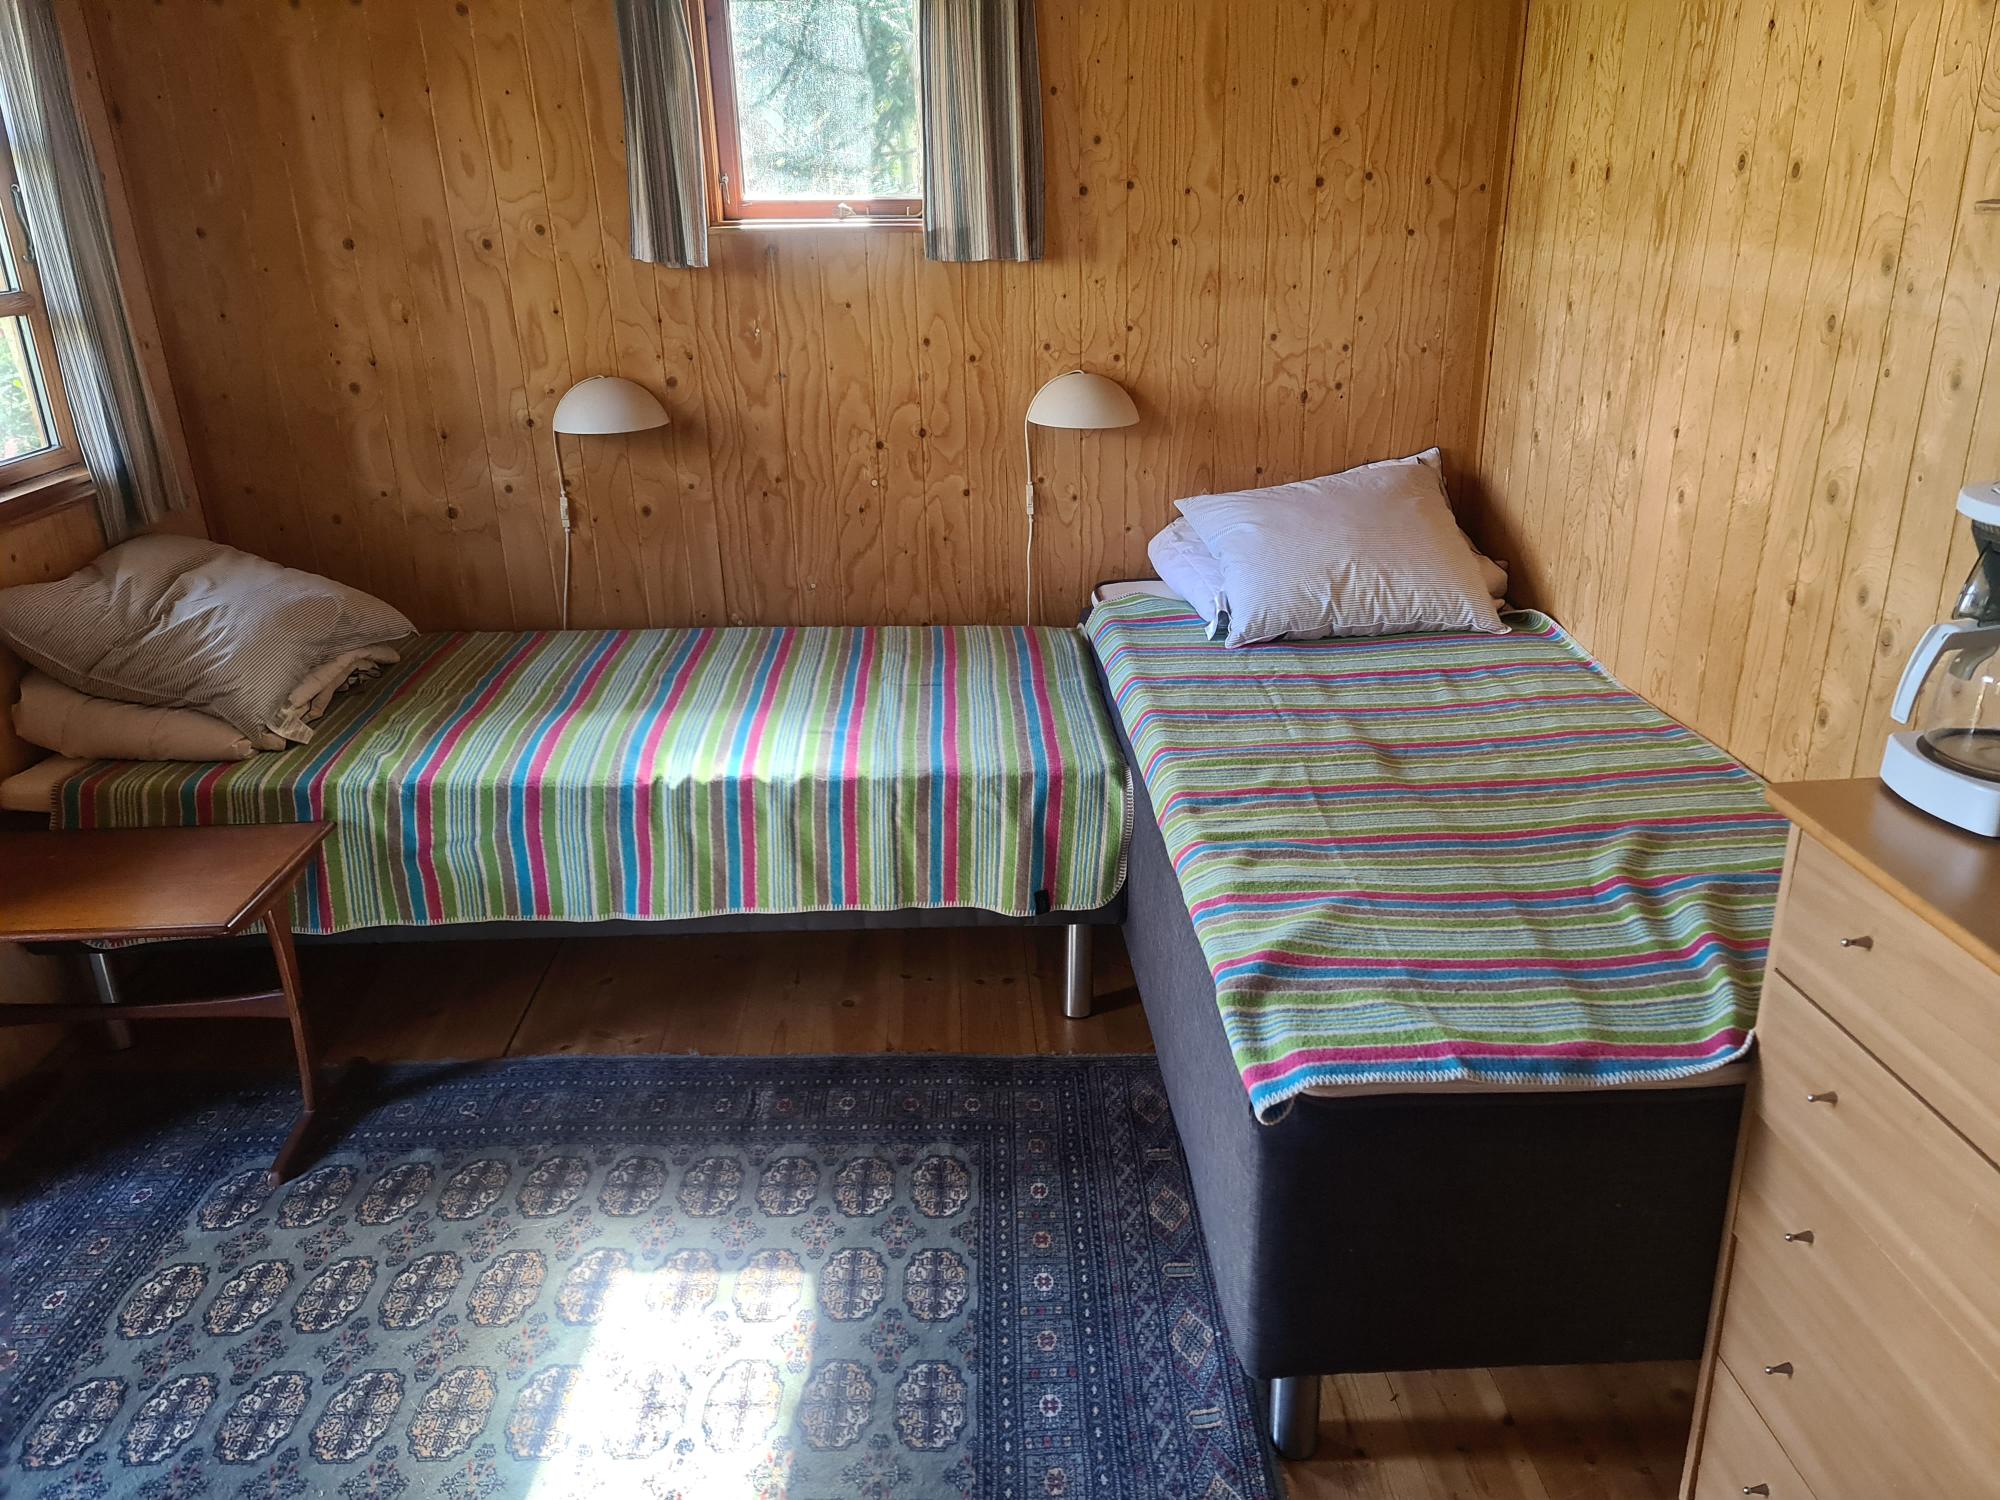 Cabin beds